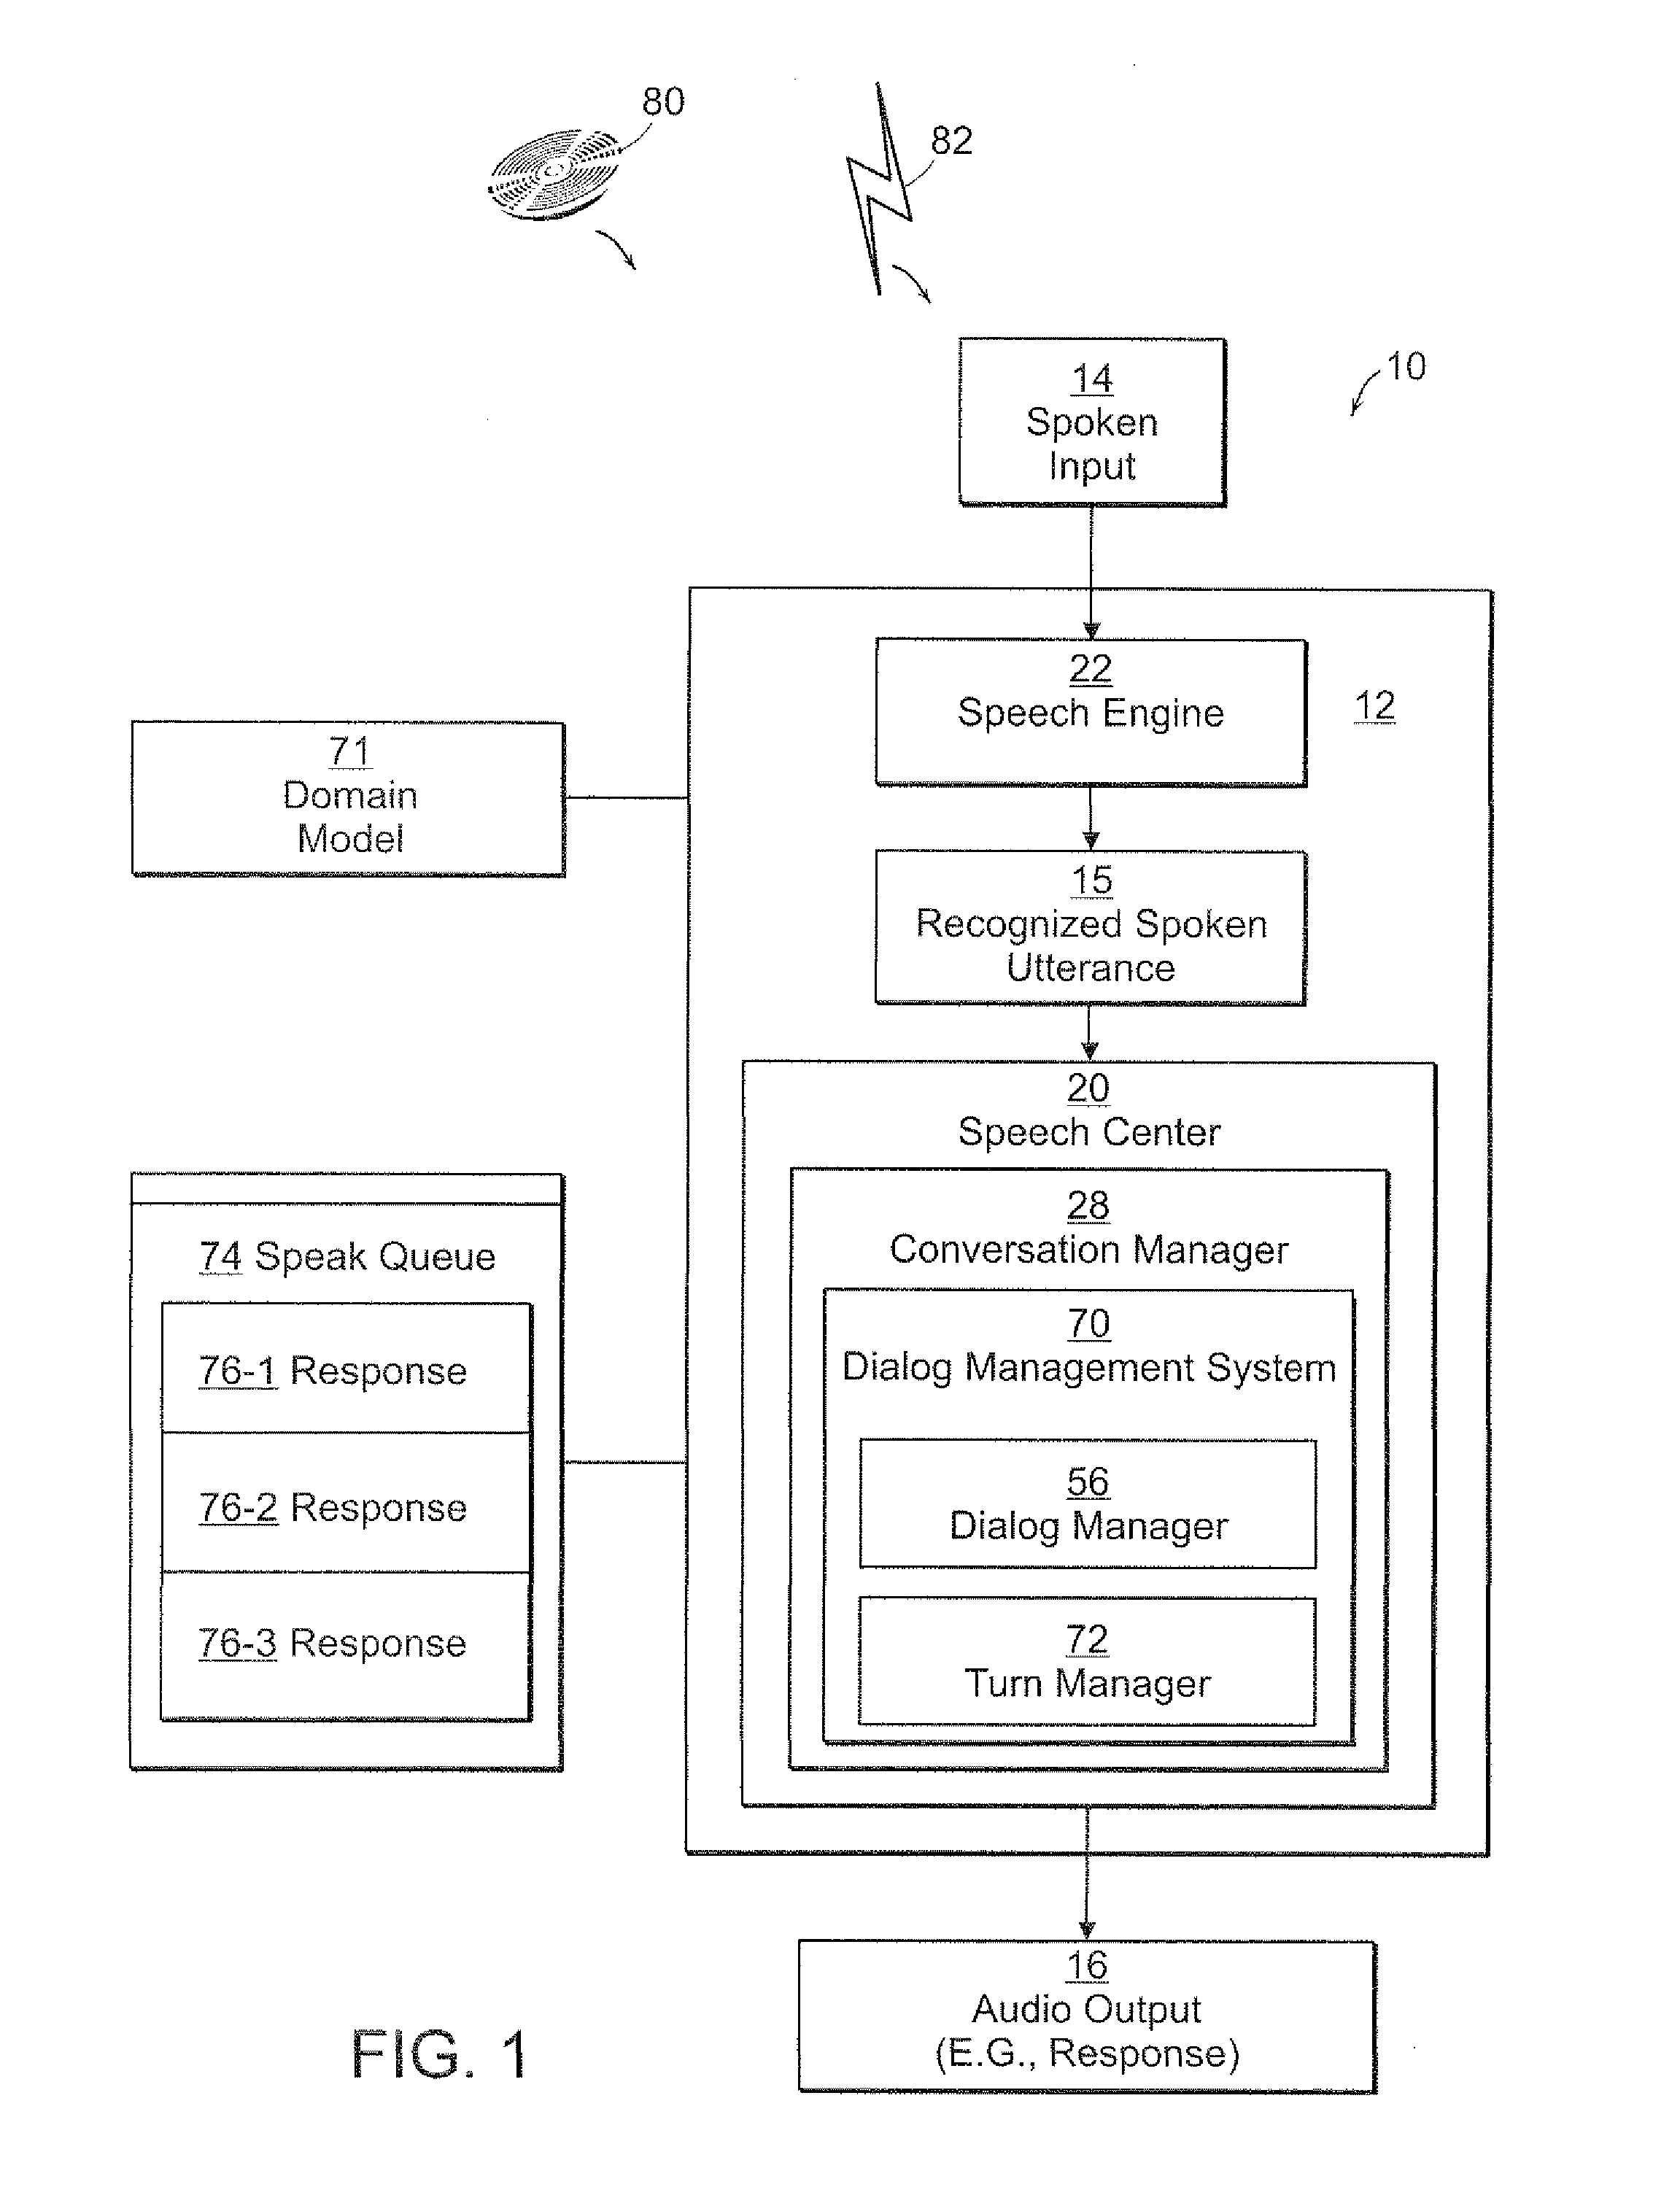 Method and Apparatus for Managing Dialog Management in a Computer Conversation